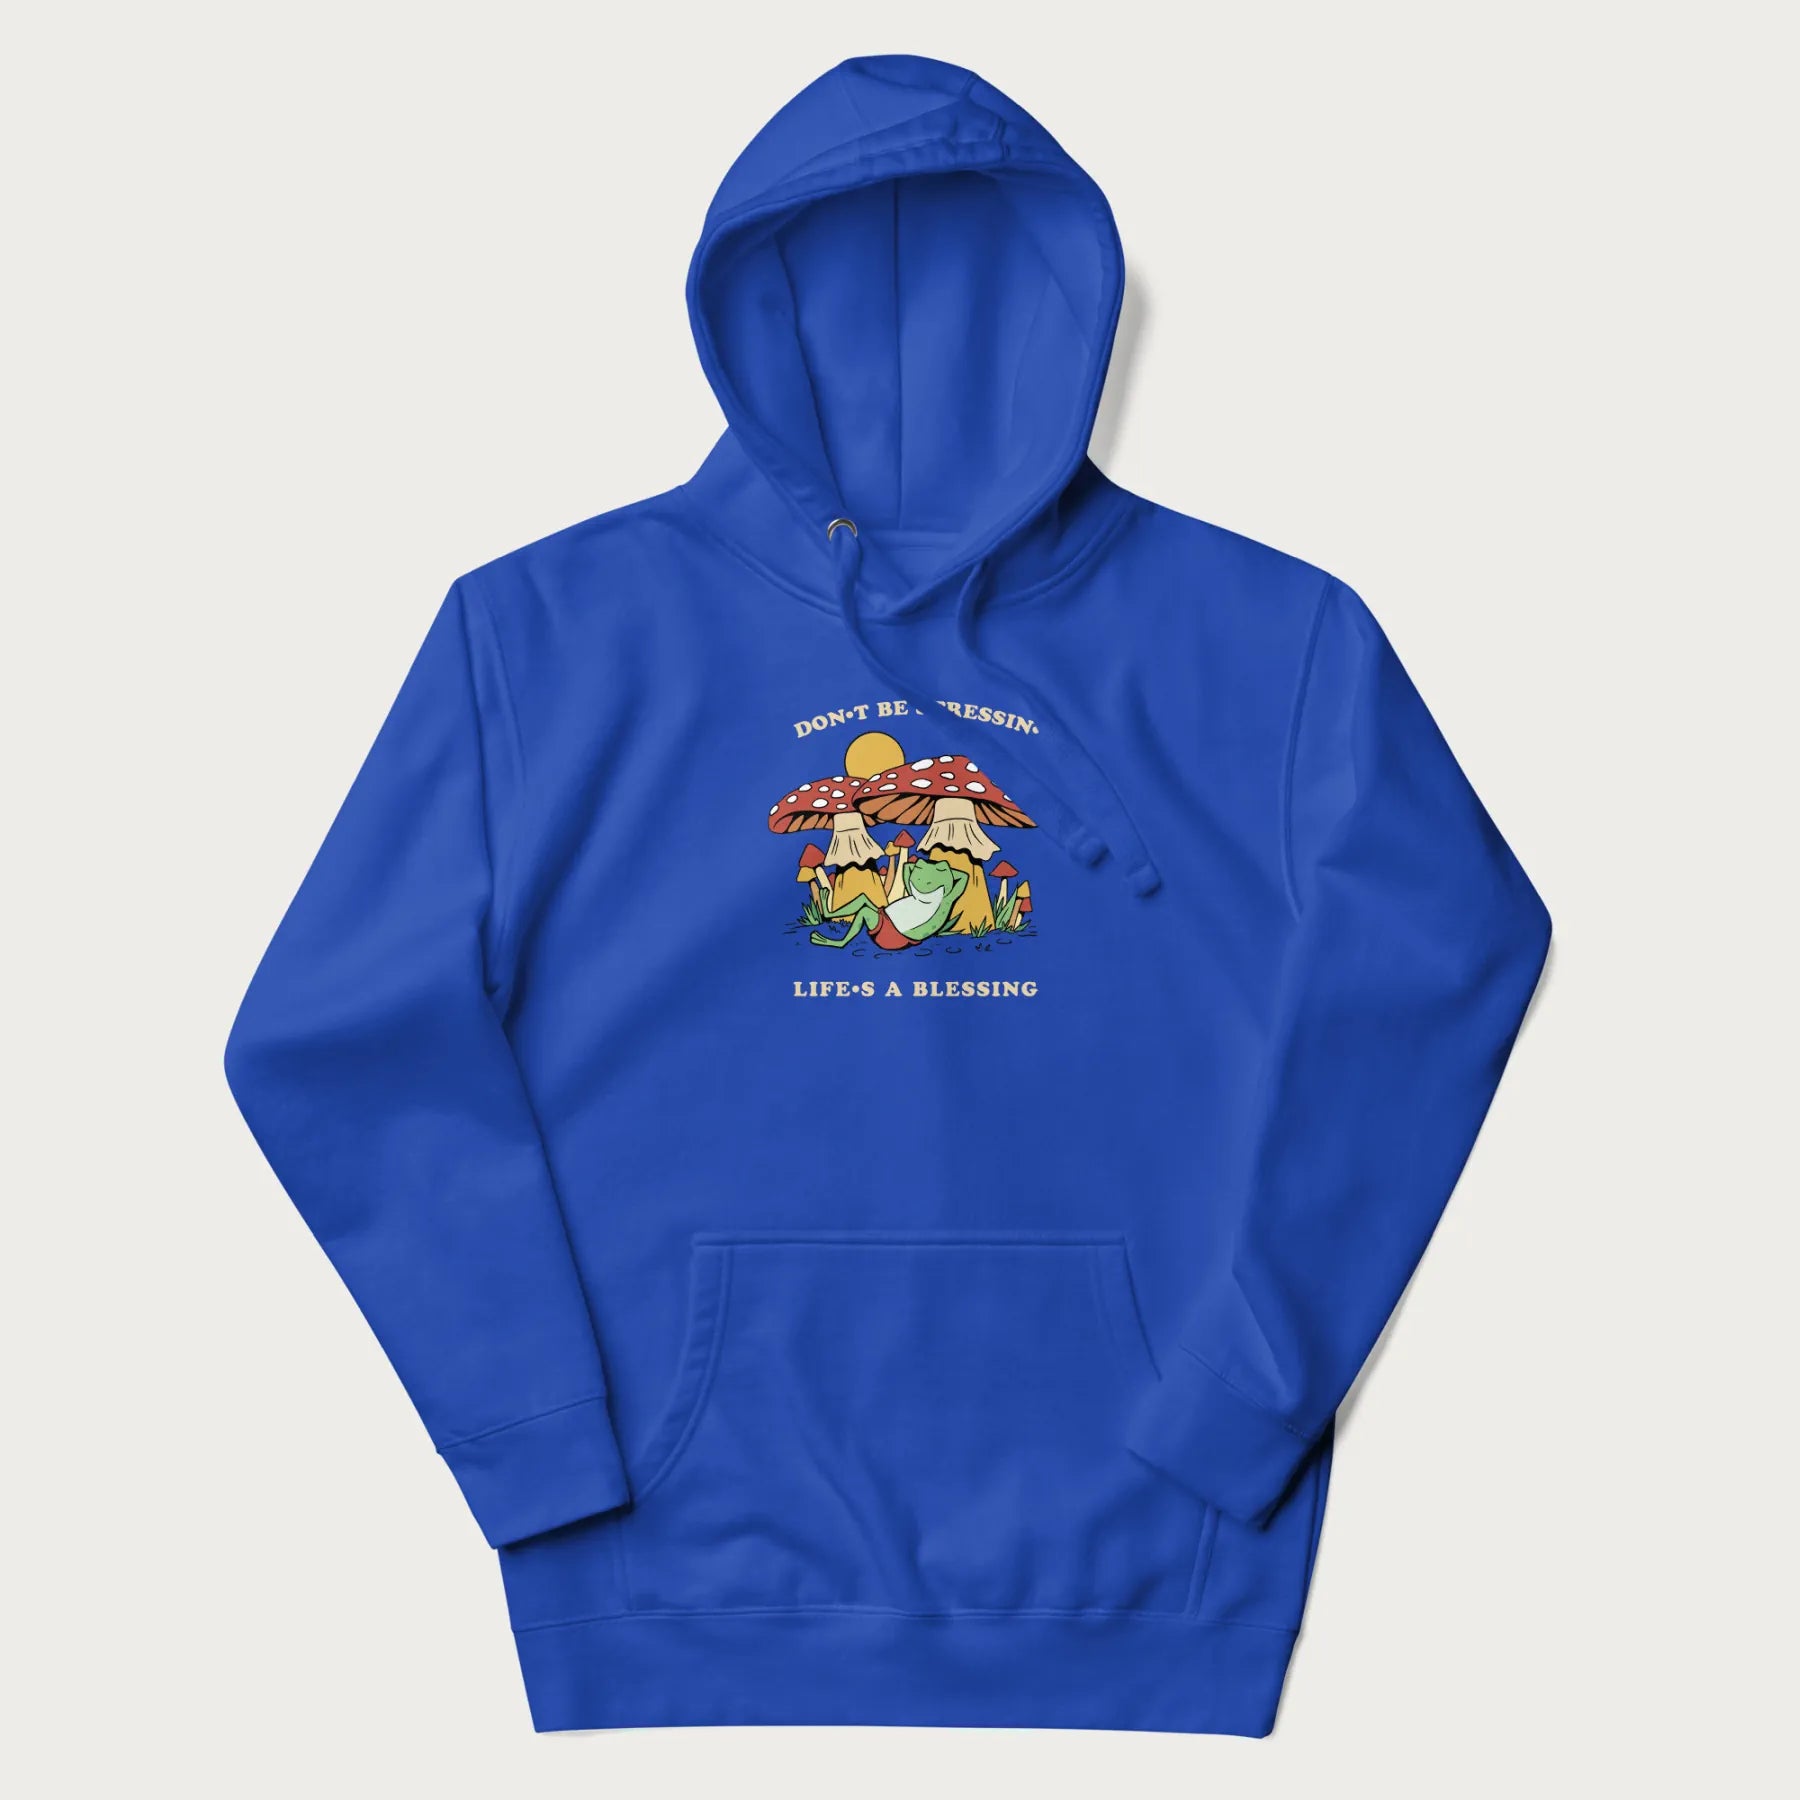 Royal blue hoodie with a graphic of a frog lounging under mushrooms and the phrases 'Don't Be Stressin' Life's a Blessing'.